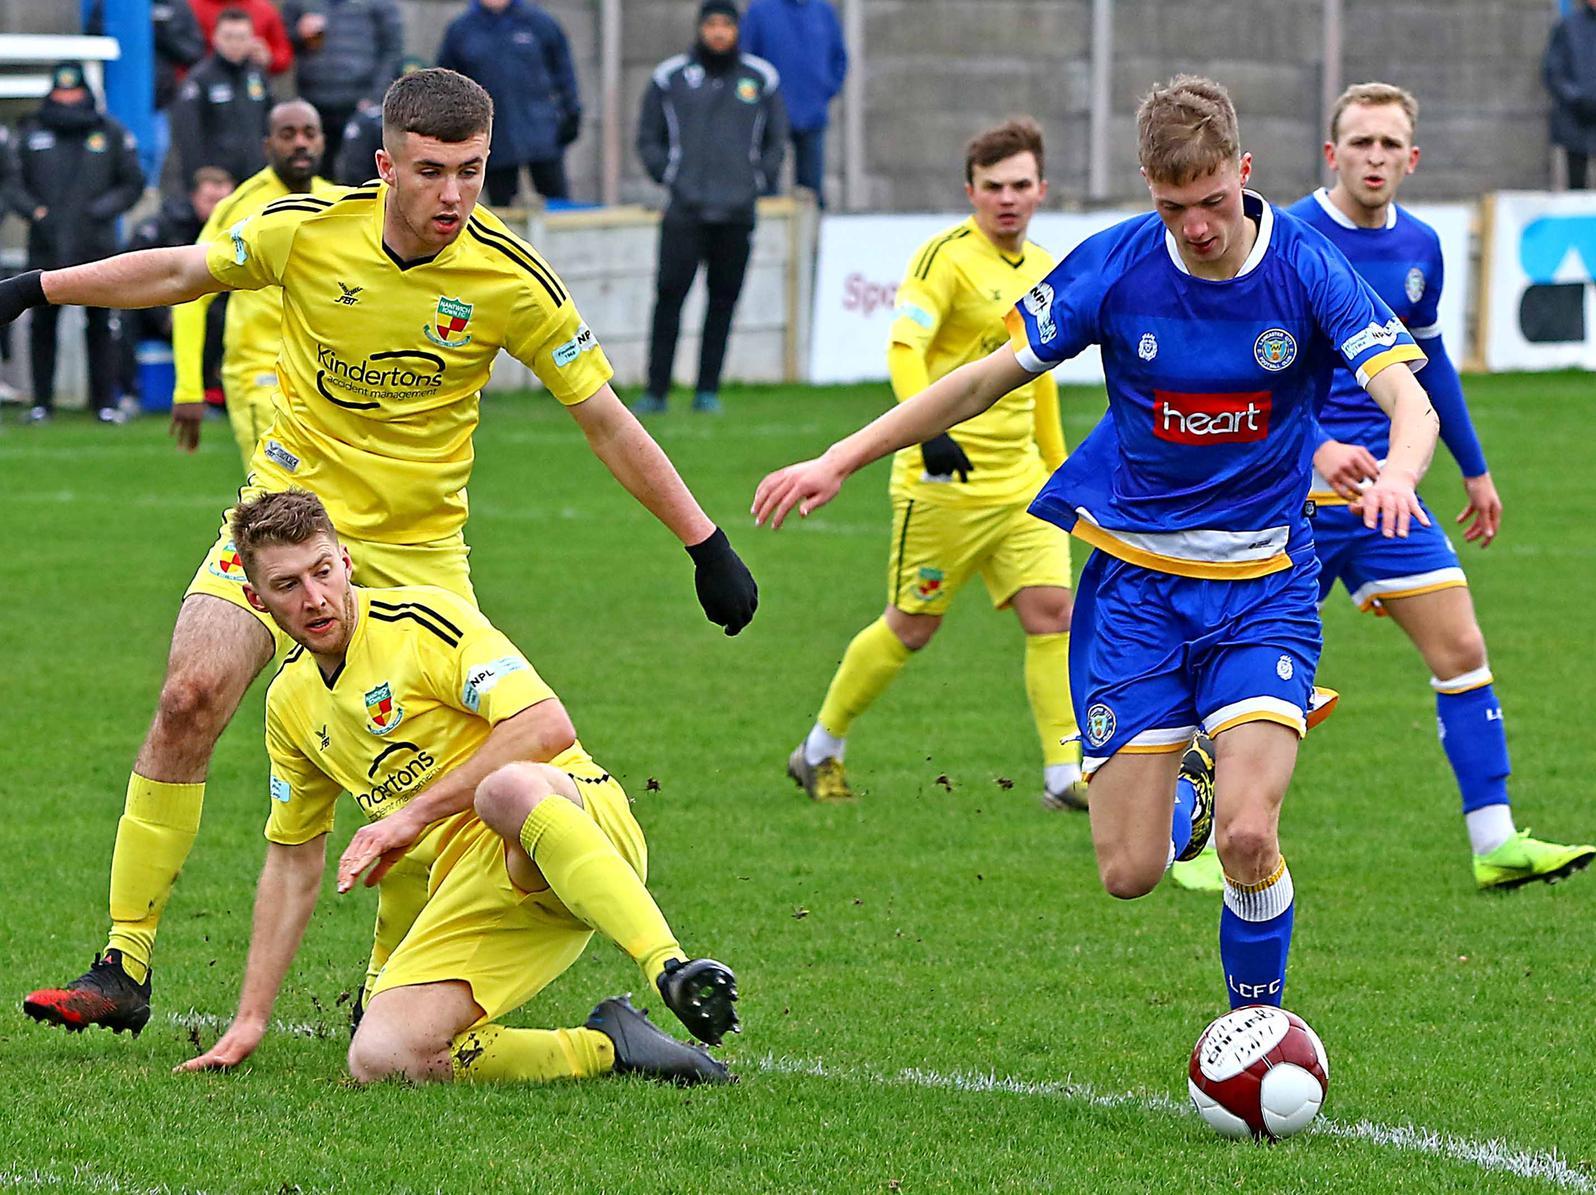 Jack Armer started Lancaster City's 0-0 draw against Nantwich Town as the Dolly Blues maintained their four point advantage over their fellow play-off side. City sit third, five points off the top.